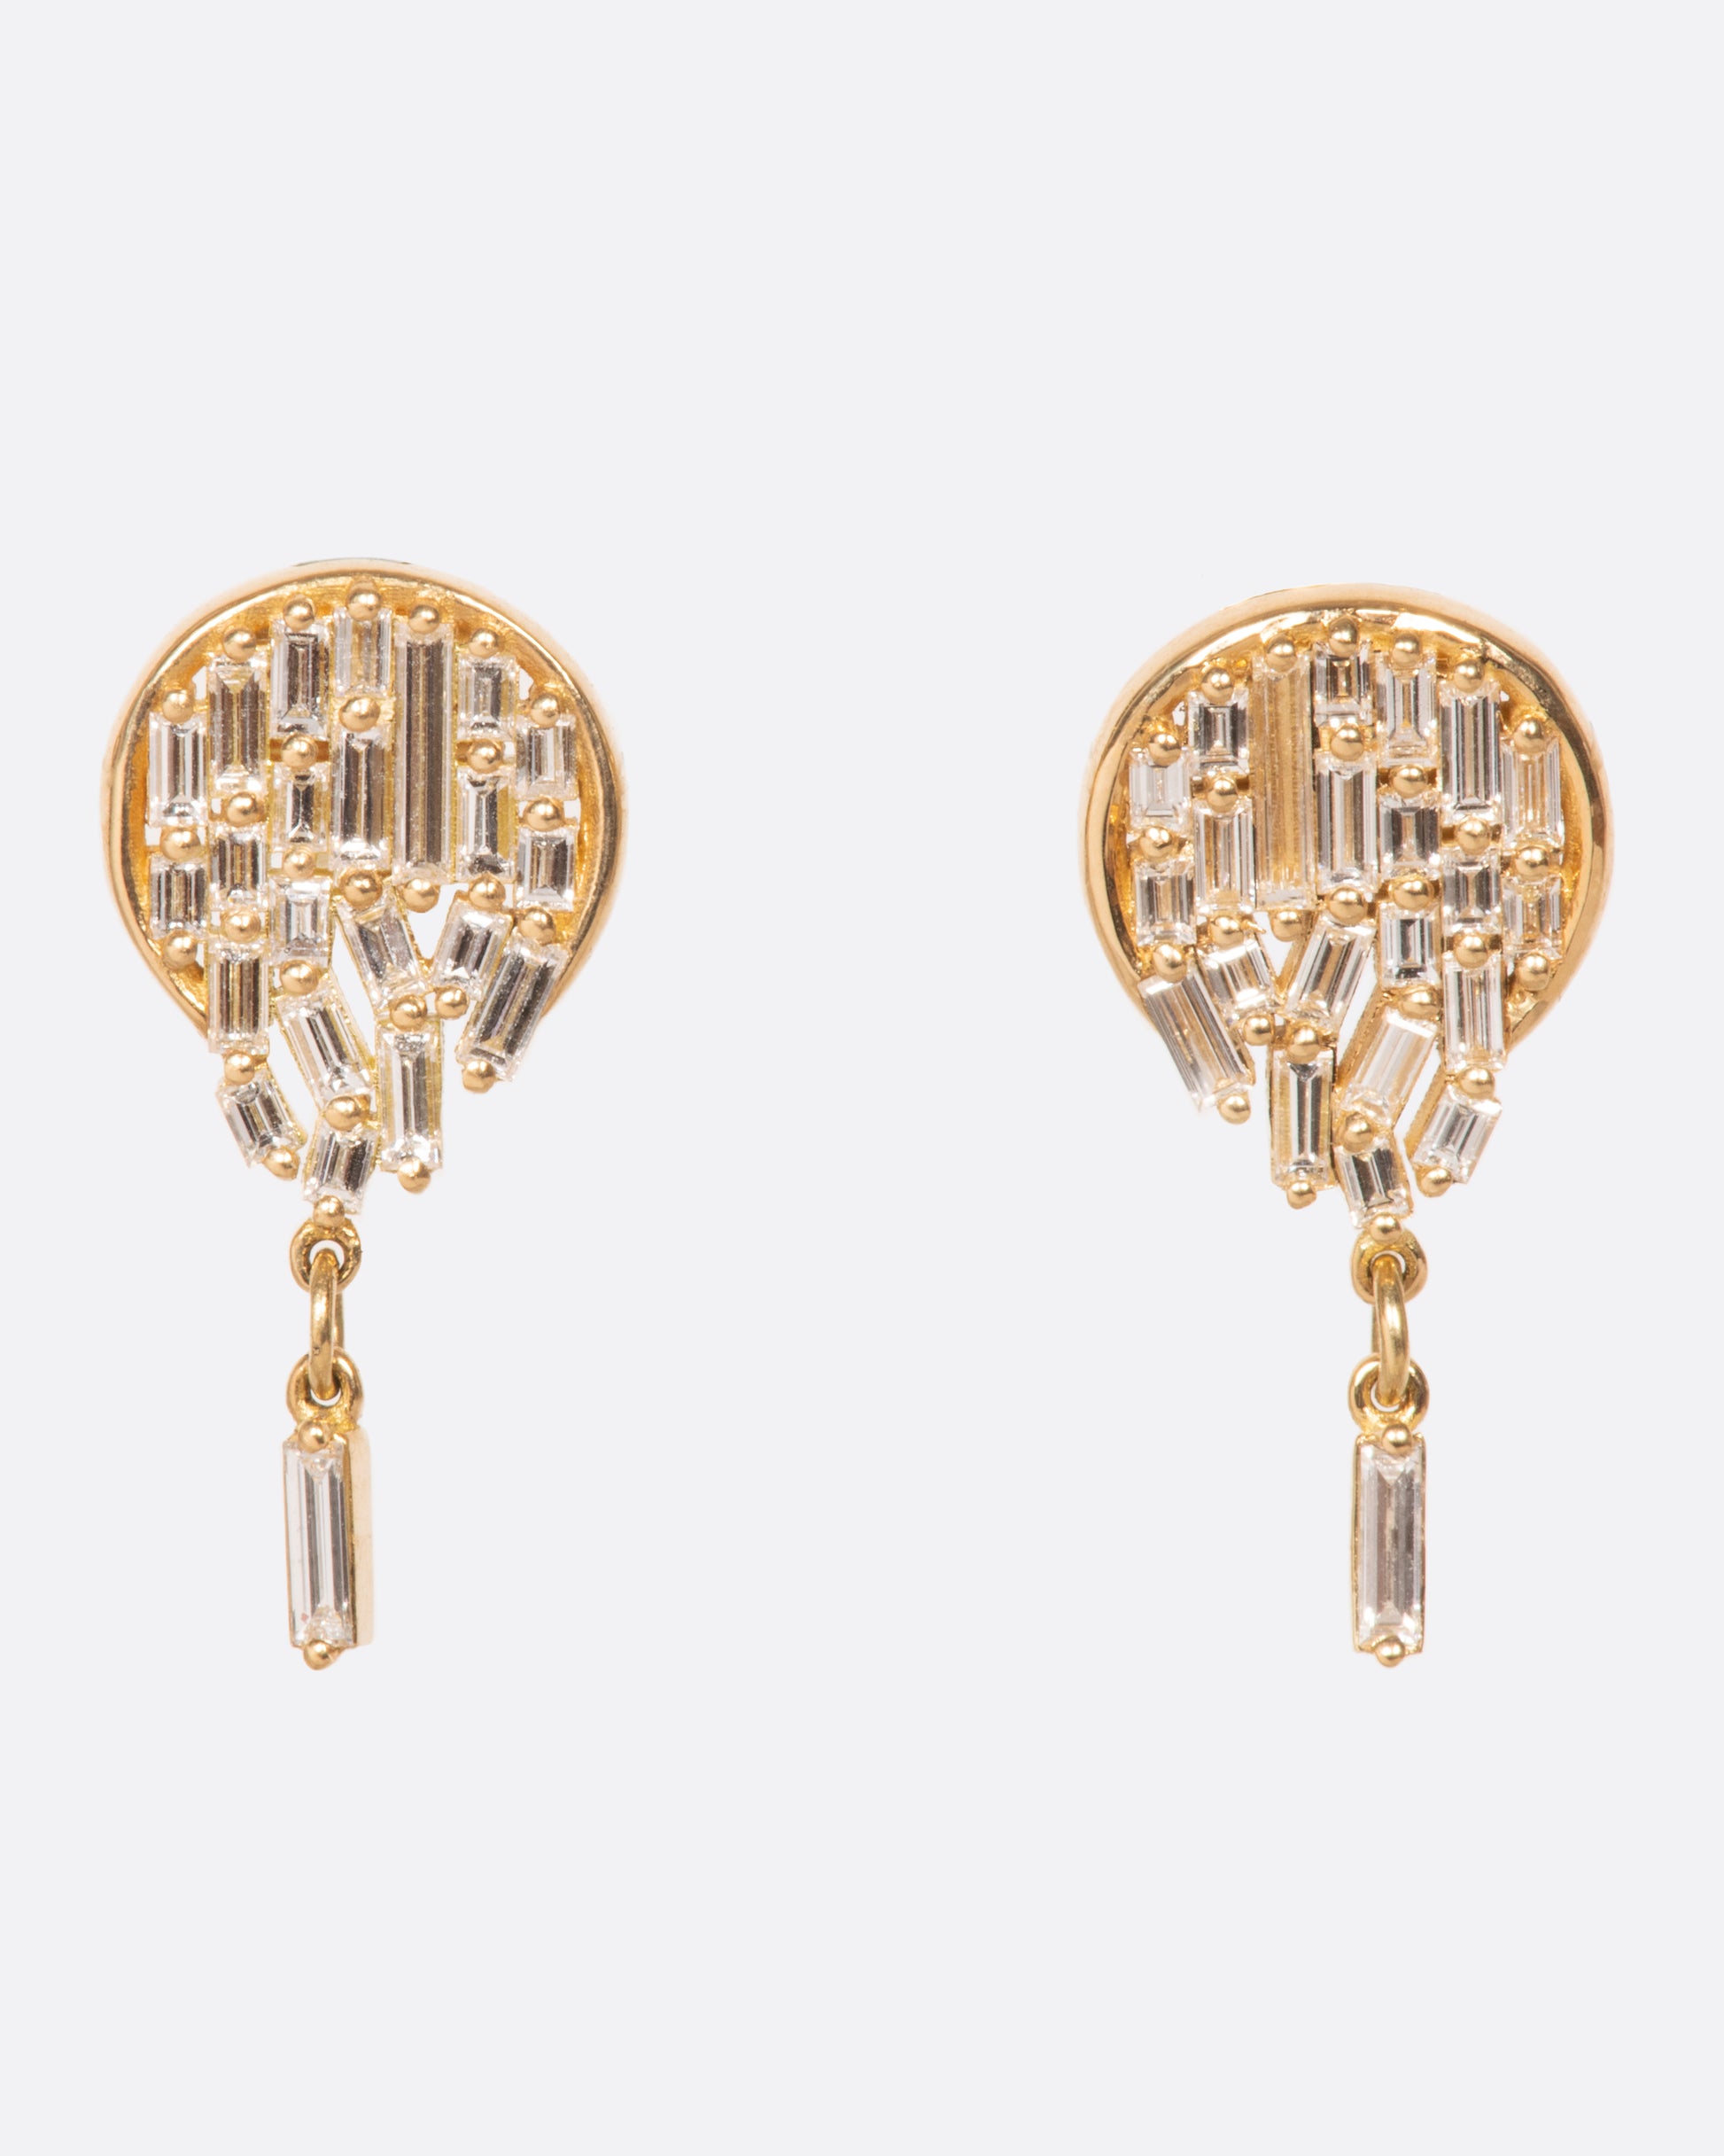 A pair of round stud earrings dripping with diamond baguettes.